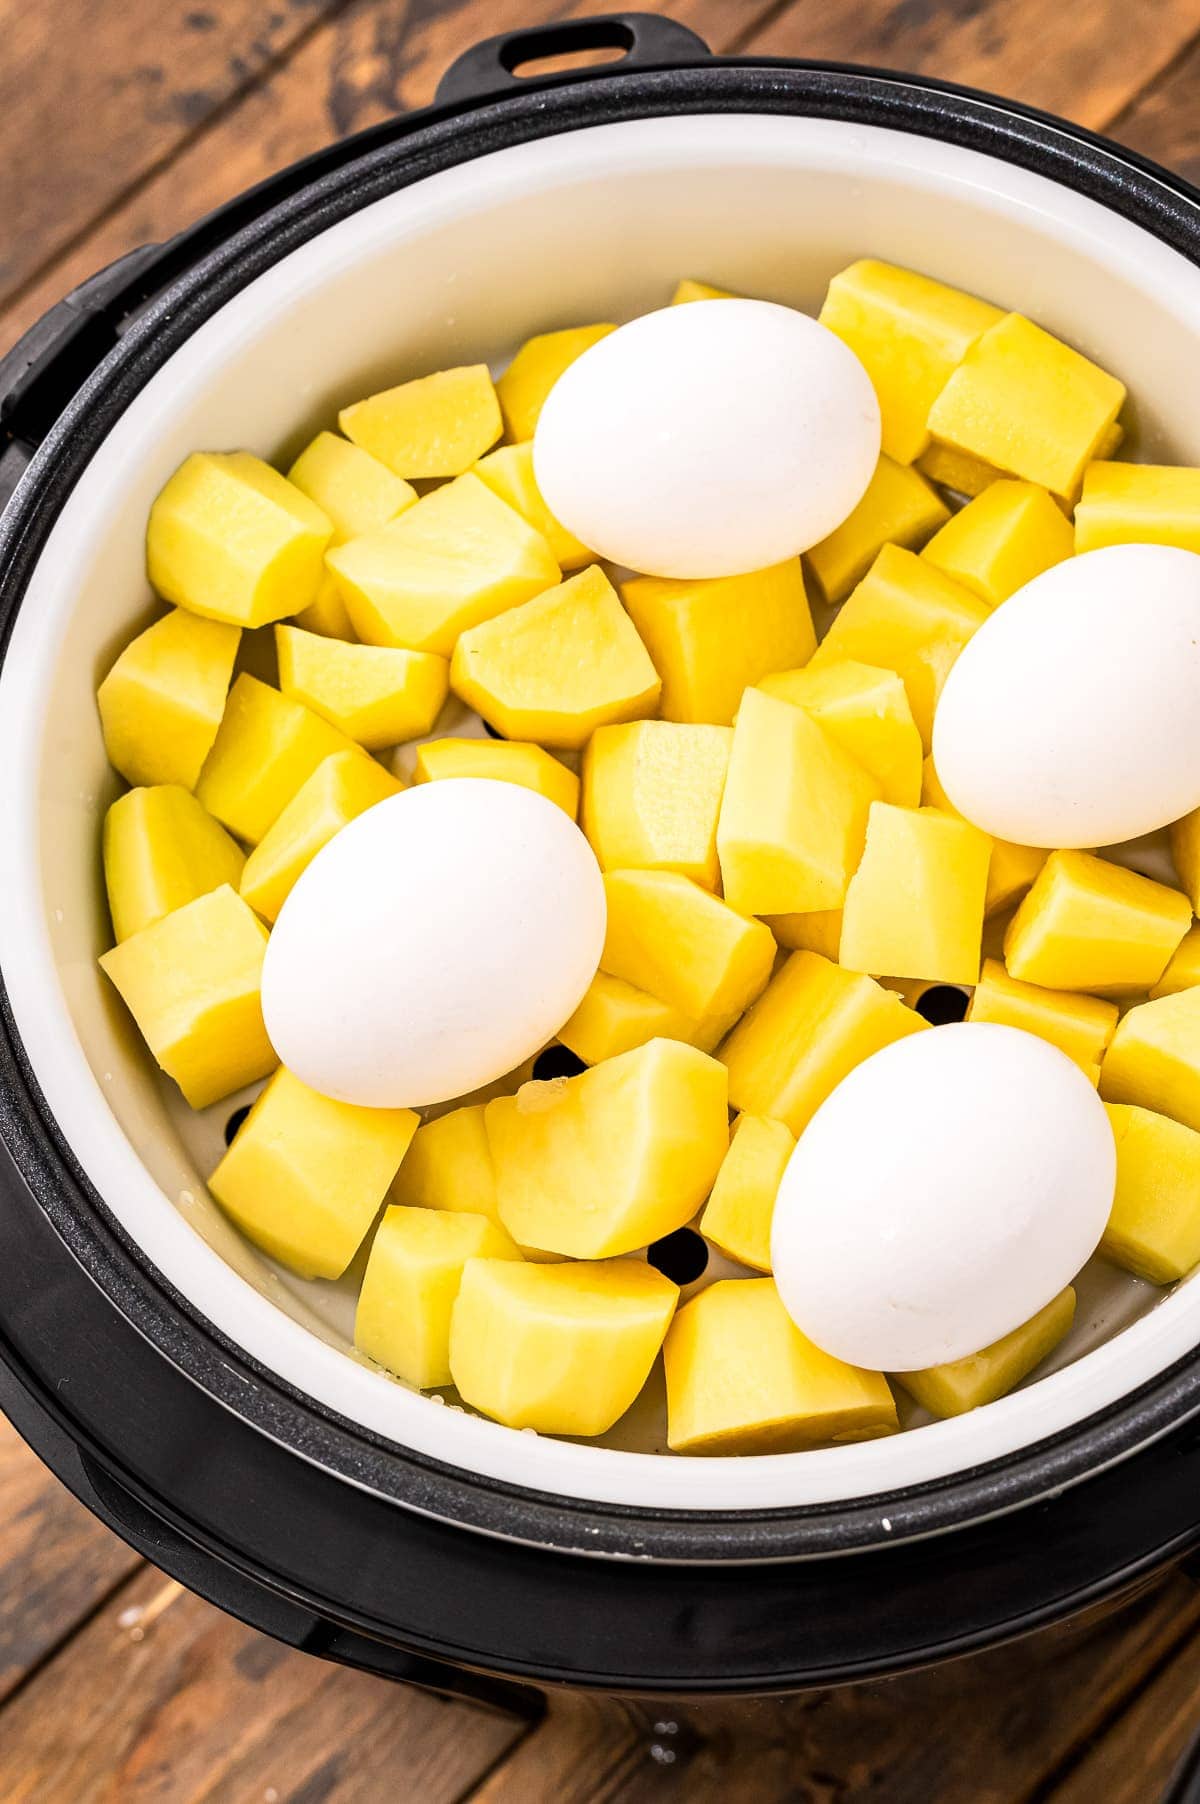 Instant Pot filled with raw potatoes and eggs before cooking